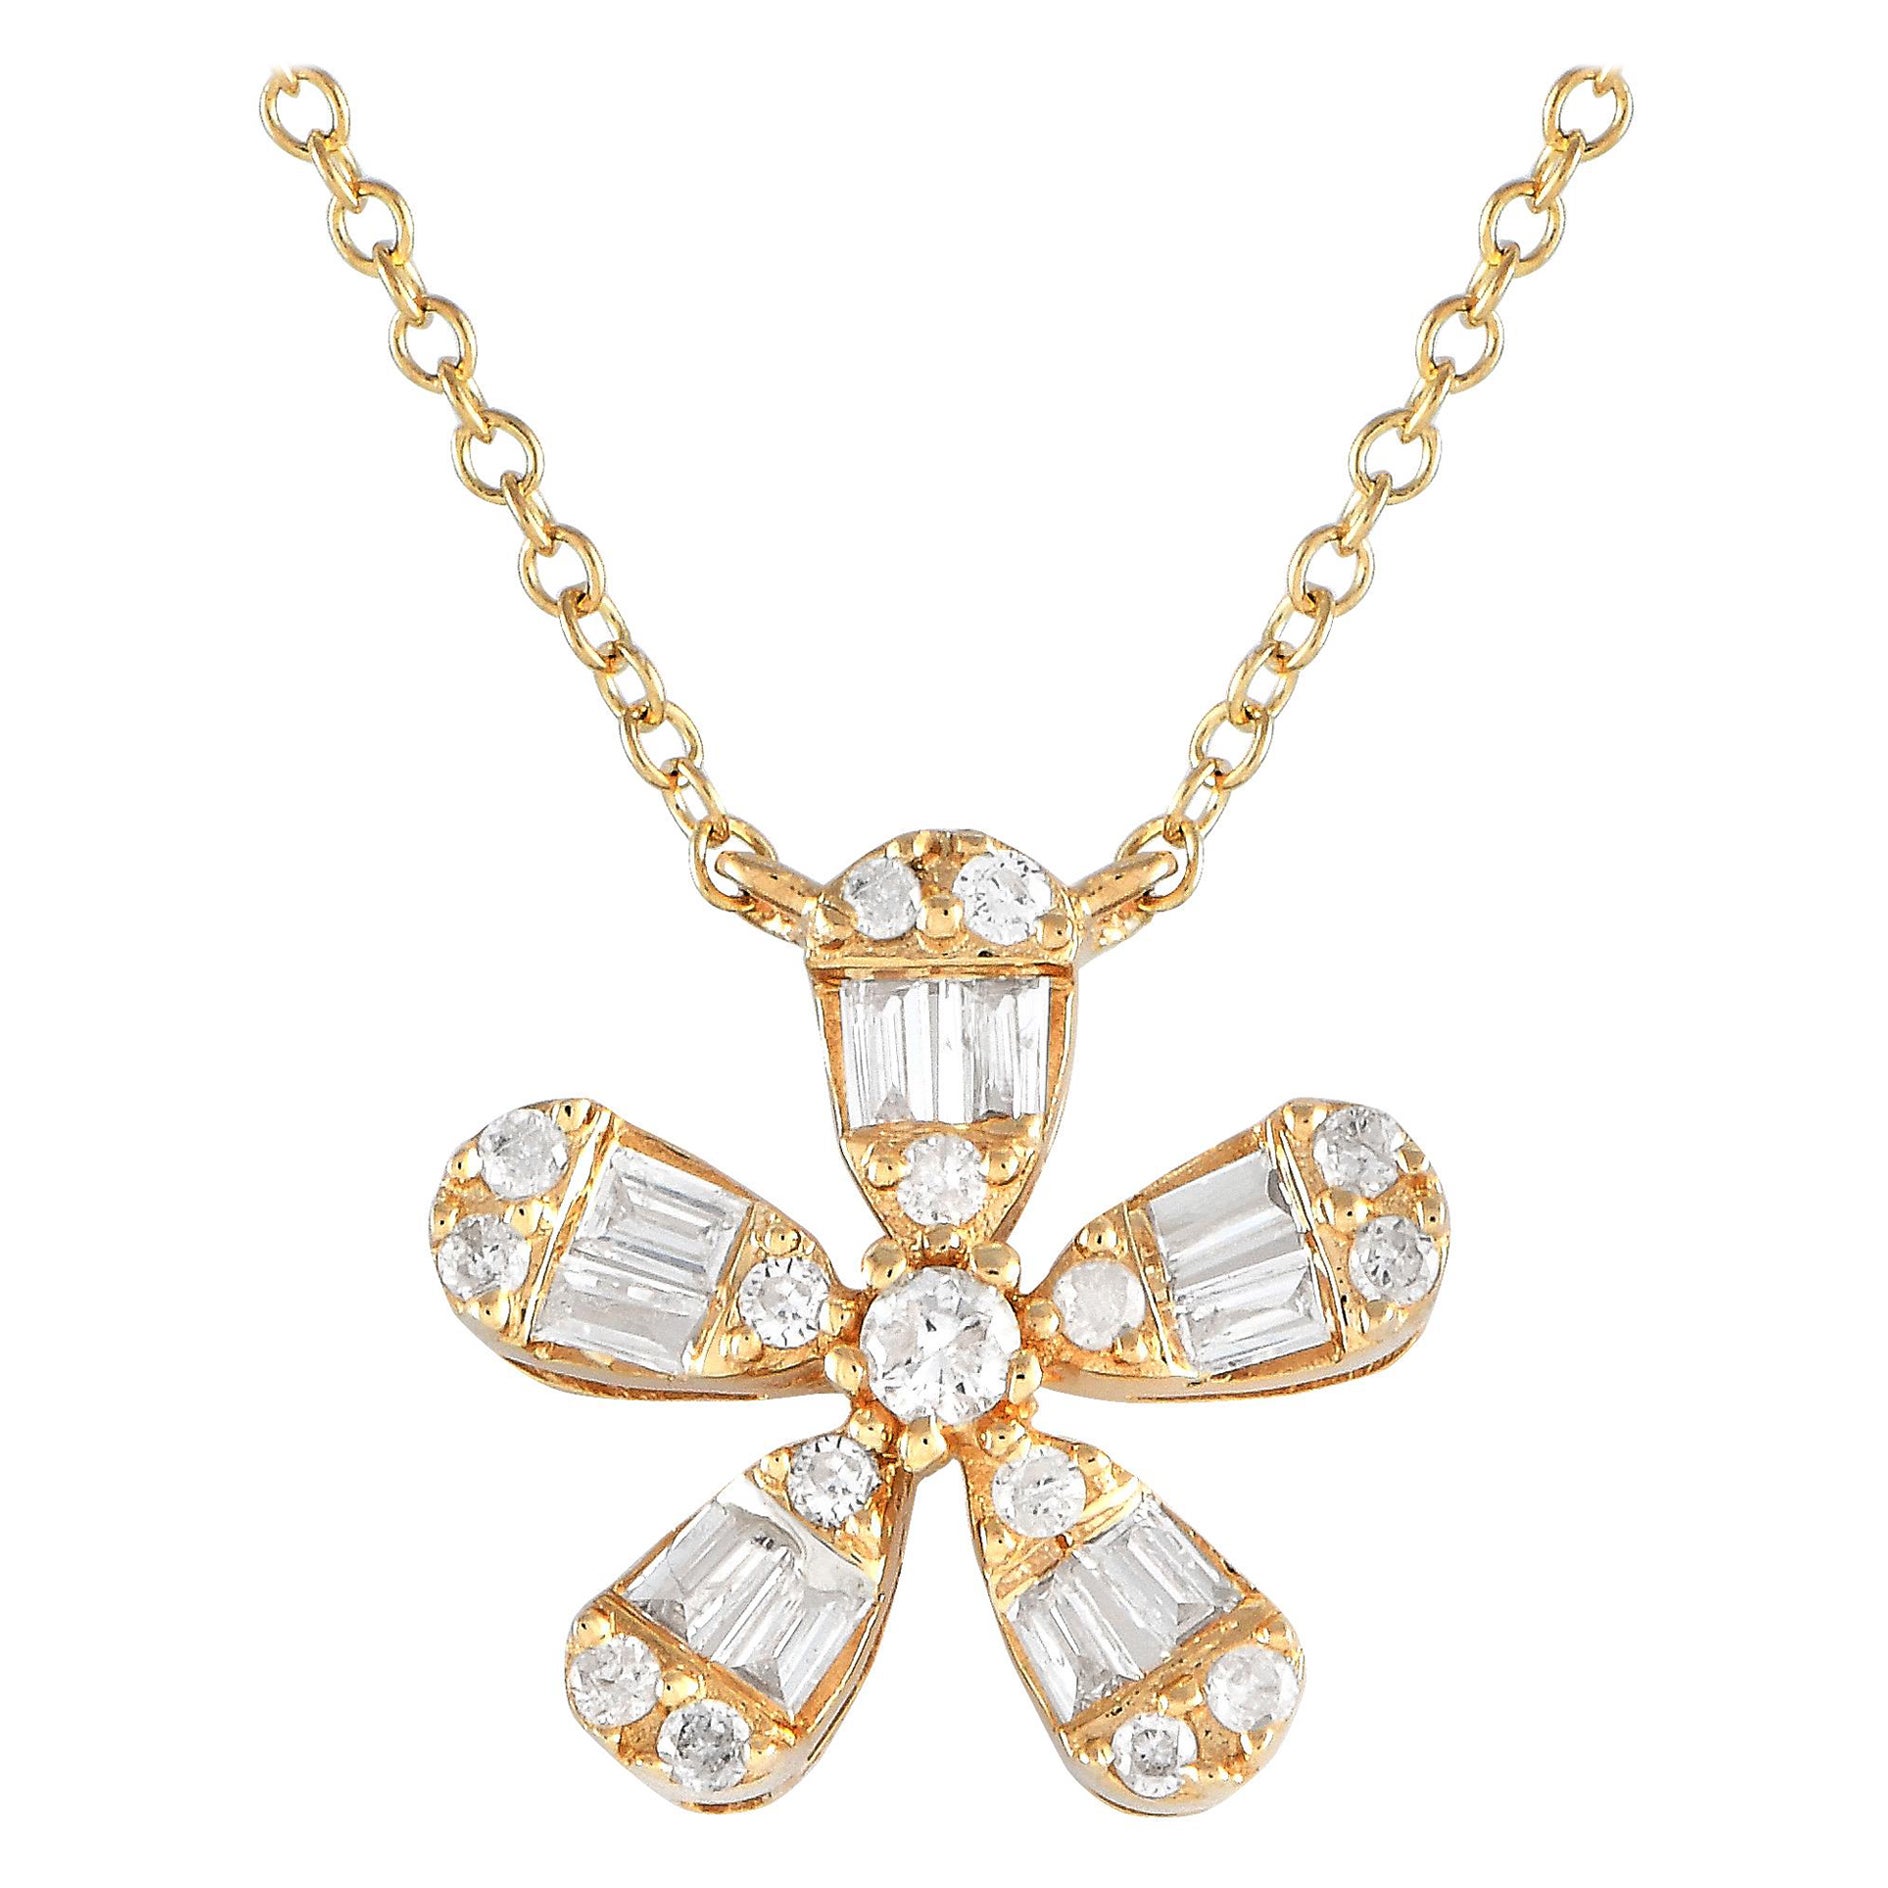 LB Exclusive 14K Yellow Gold 0.23ct Diamond Flower Necklace PN14995 For Sale